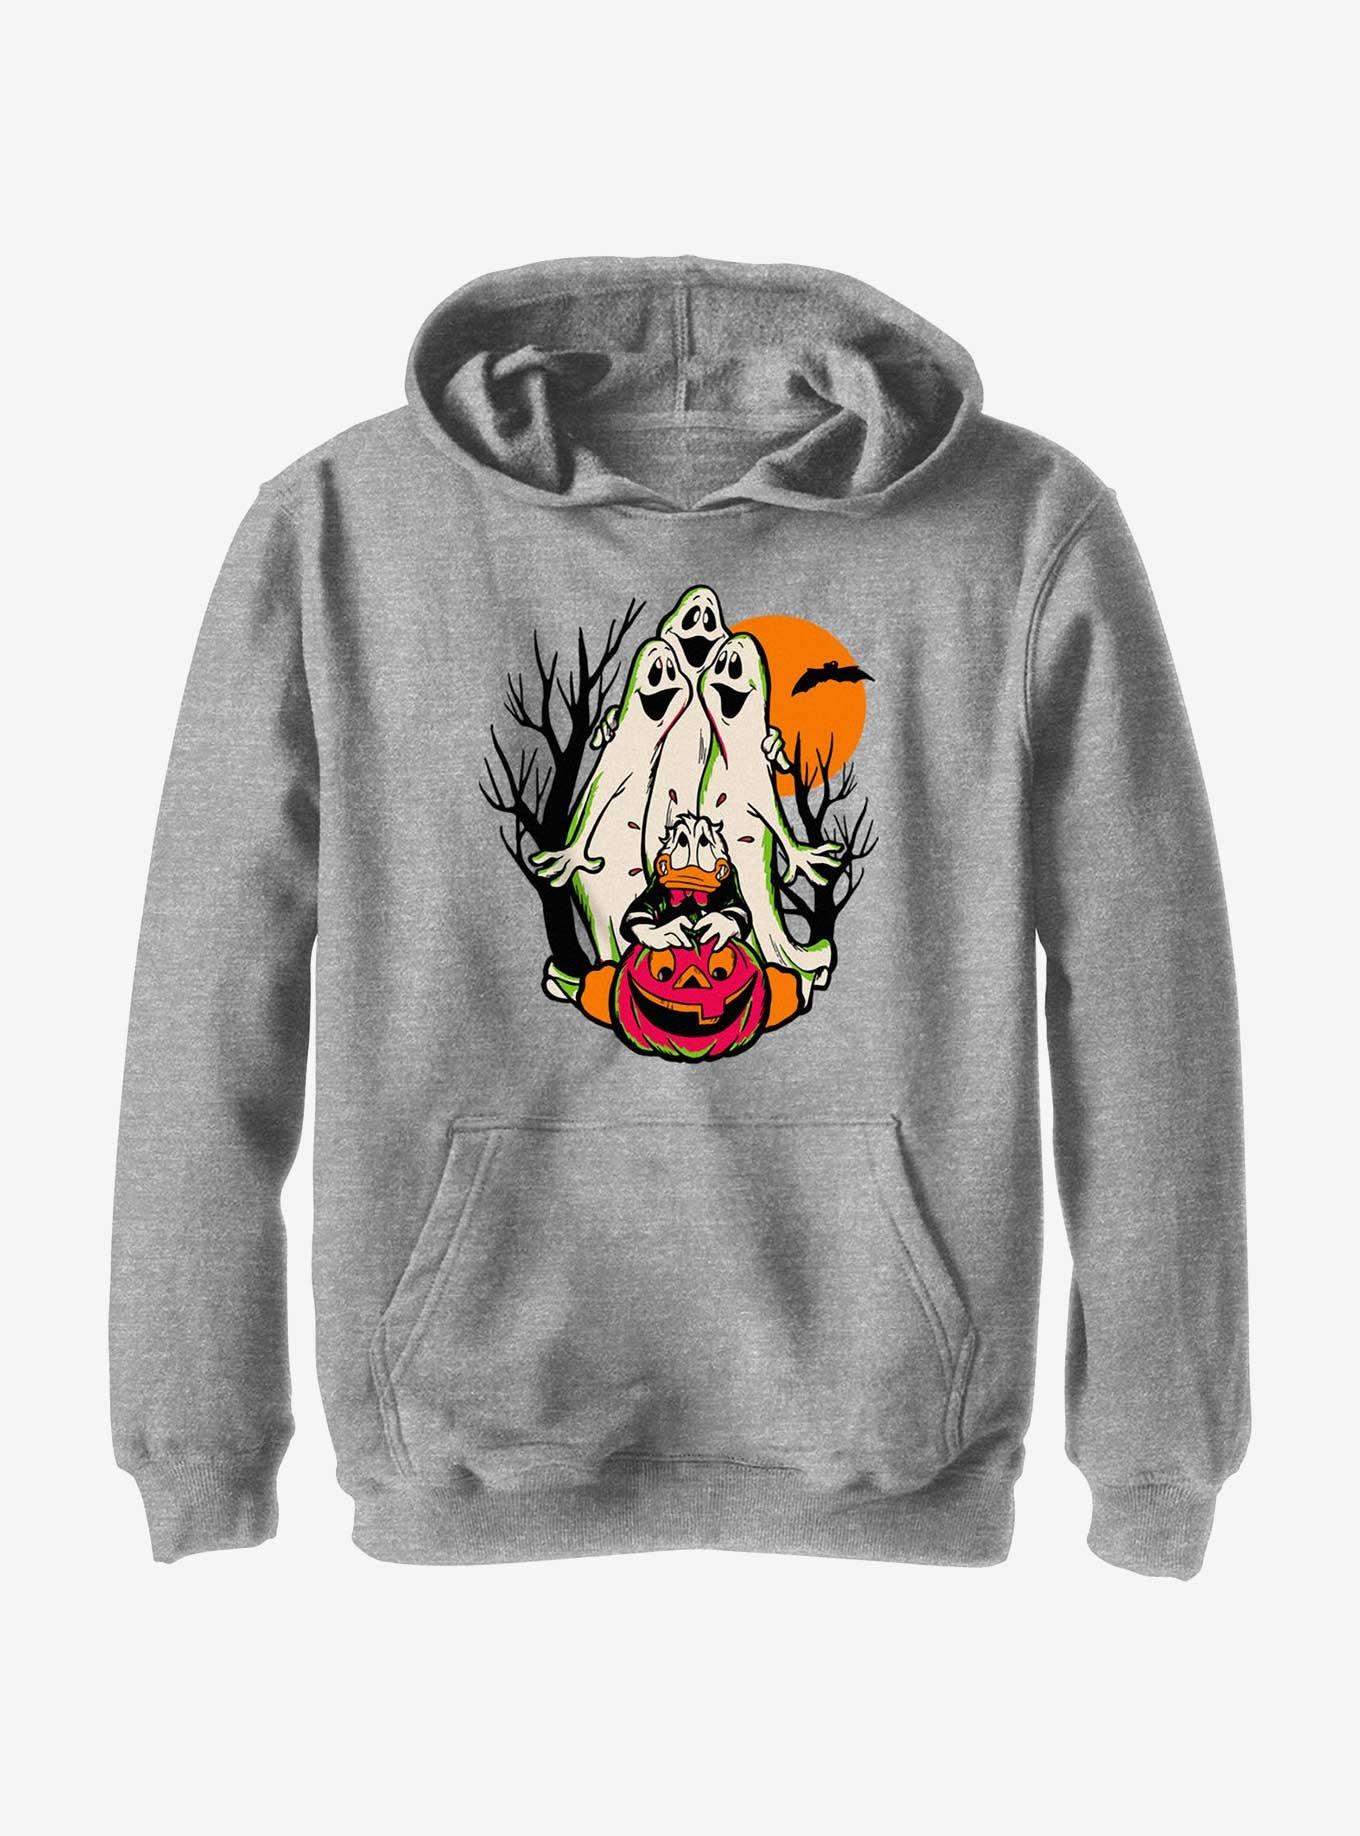 Disney100 Halloween Spooky Ghosts Scared Donald Youth Hoodie, , hi-res